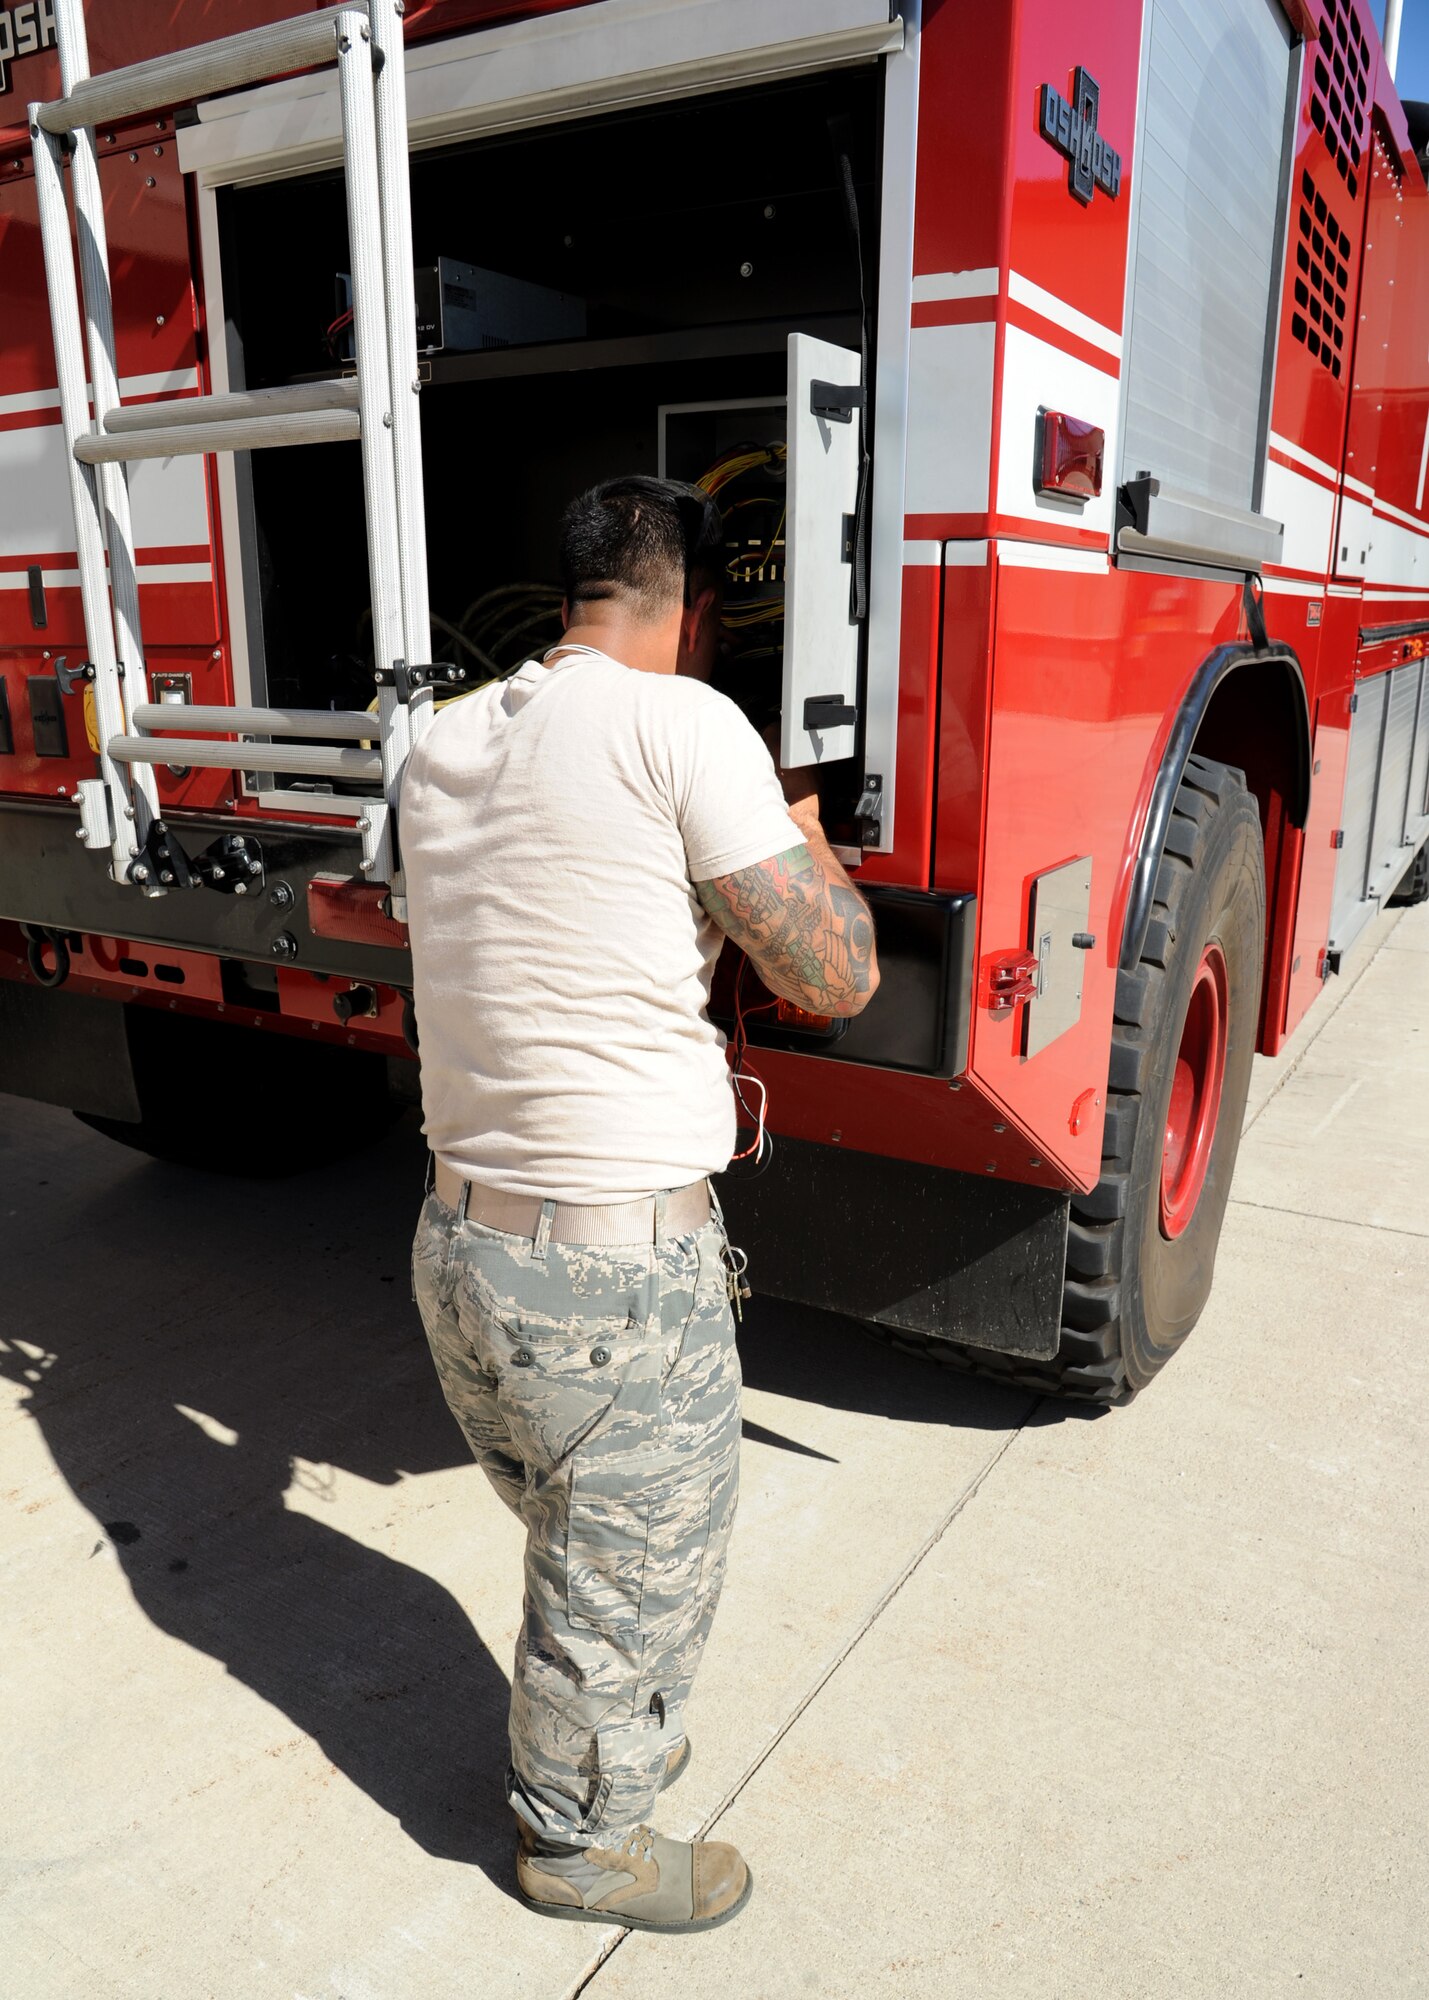 Tech. Sgt. Luis Ochoa, 319th Logistics Readiness Squadron NCO-in-charge of special purpose maintenance, works to identify an issue with a fire truck Sept. 21, 2015, on Grand Forks Air Force Base, North Dakota. The 319th LRS is scheduled to provide free vehicle inspections Sept. 26, 2015, in preparation for winter. (U.S. Air Force photo by Airman 1st Class Ryan Sparks/Released)